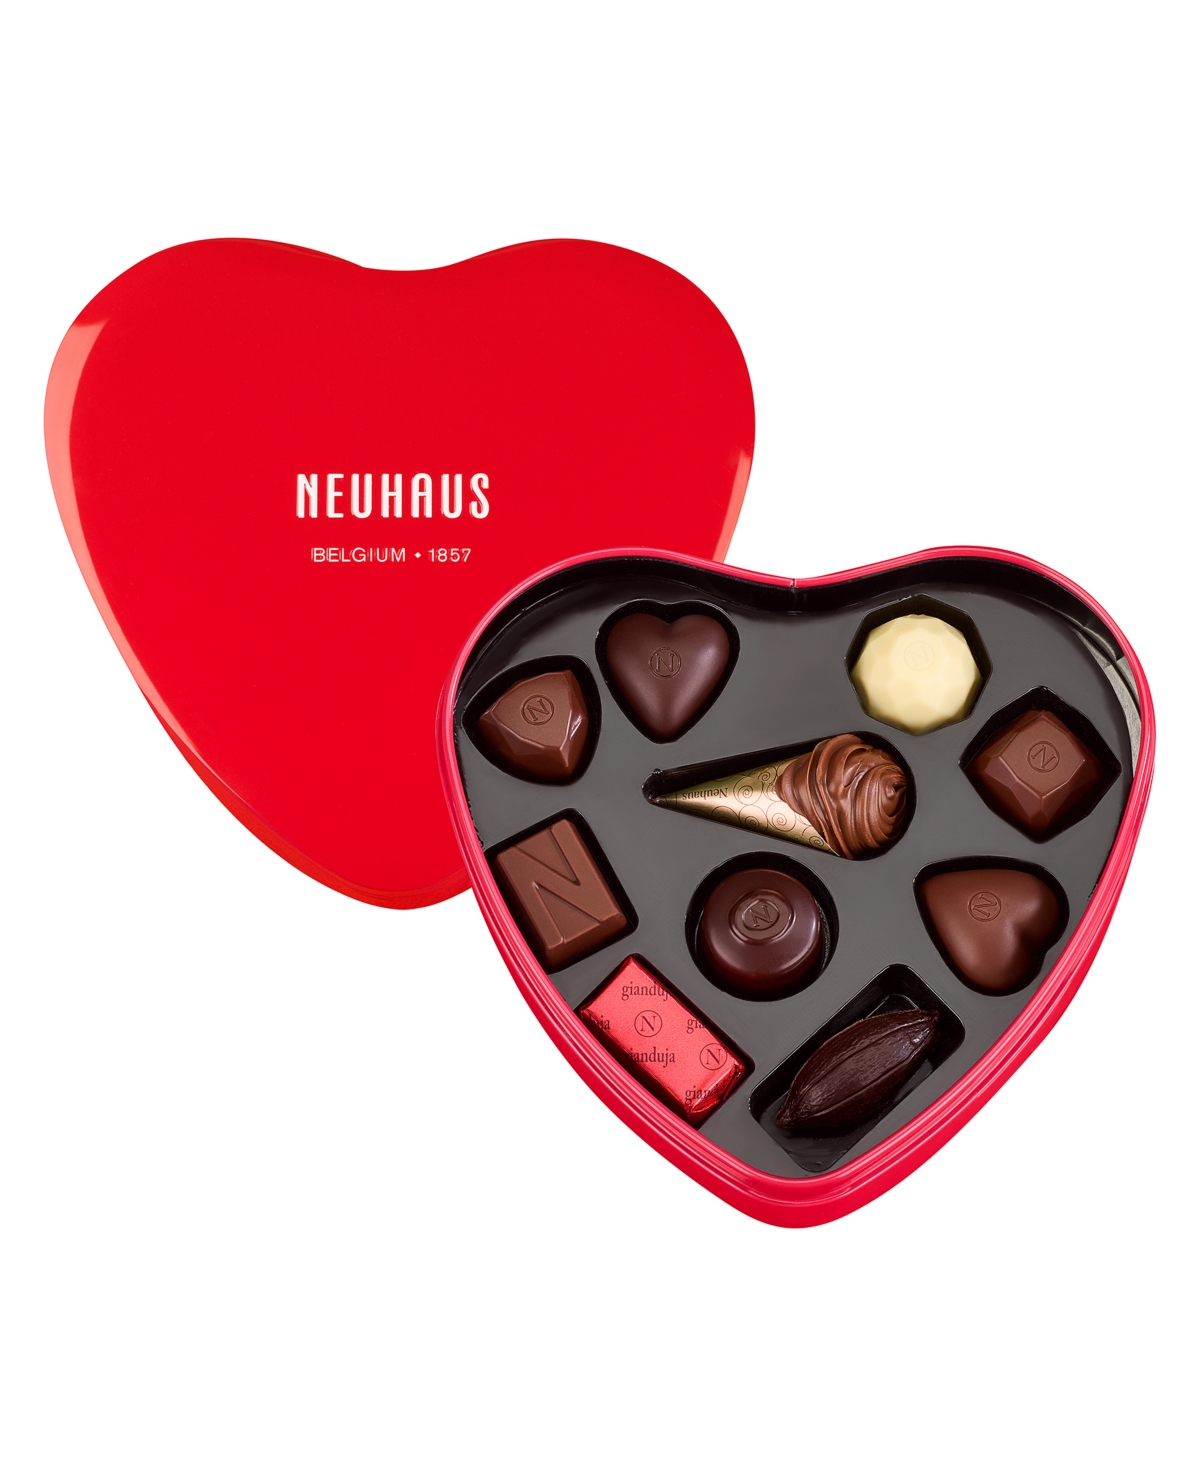 Neuhaus Belgian Chocolates In A Red Metal Heart-shaped Box, 10 Piece In No Color